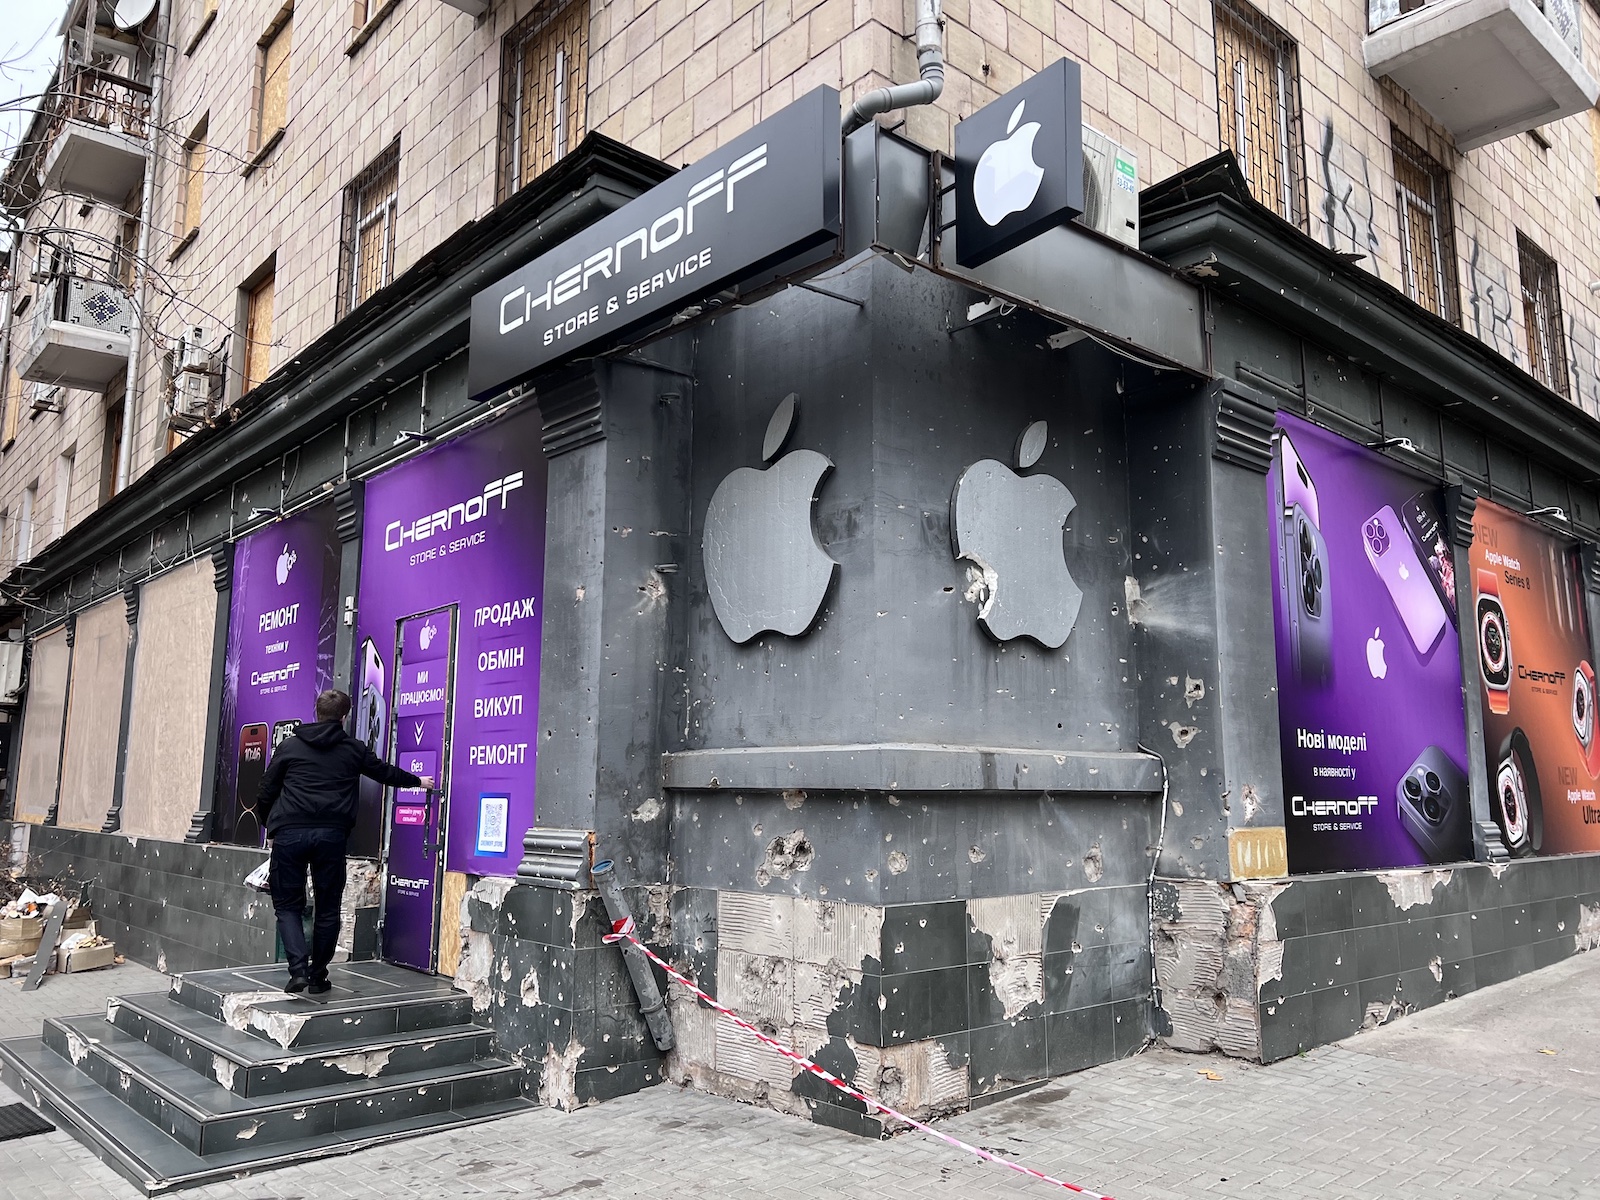 A bombed-out electronics shop with an Apple logo